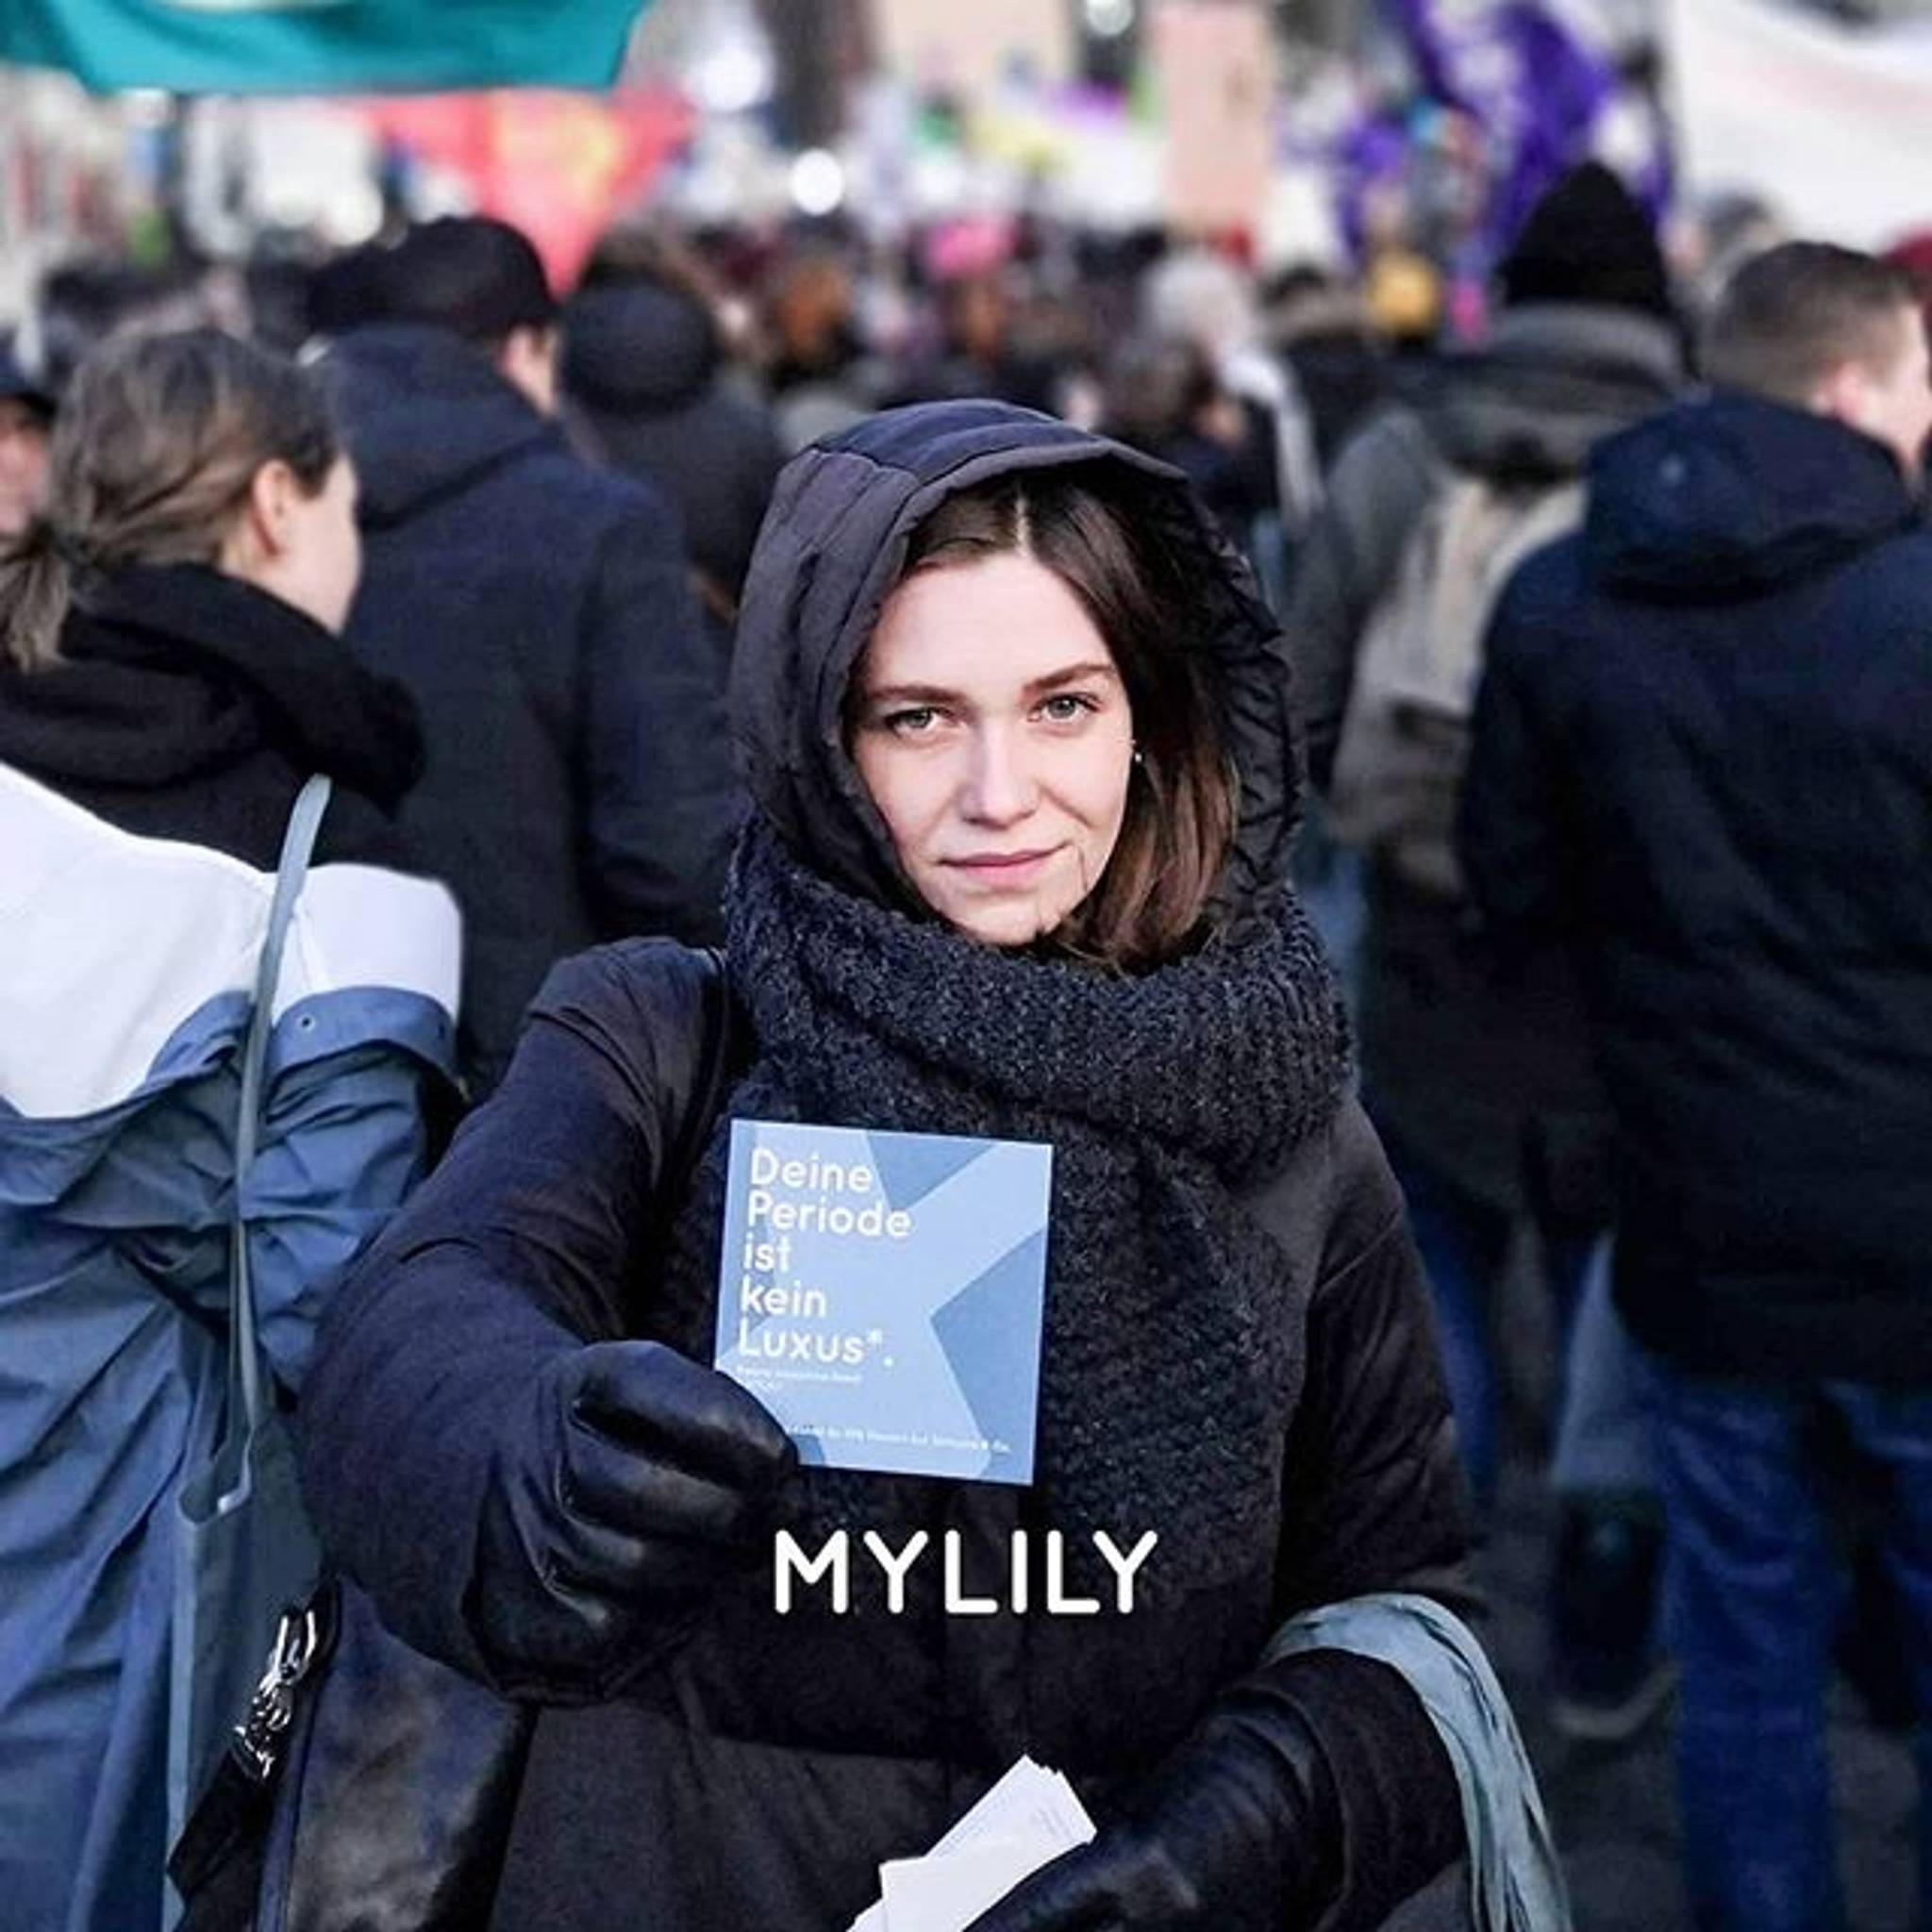 Tampon brand MYLILY breaks down period taboos